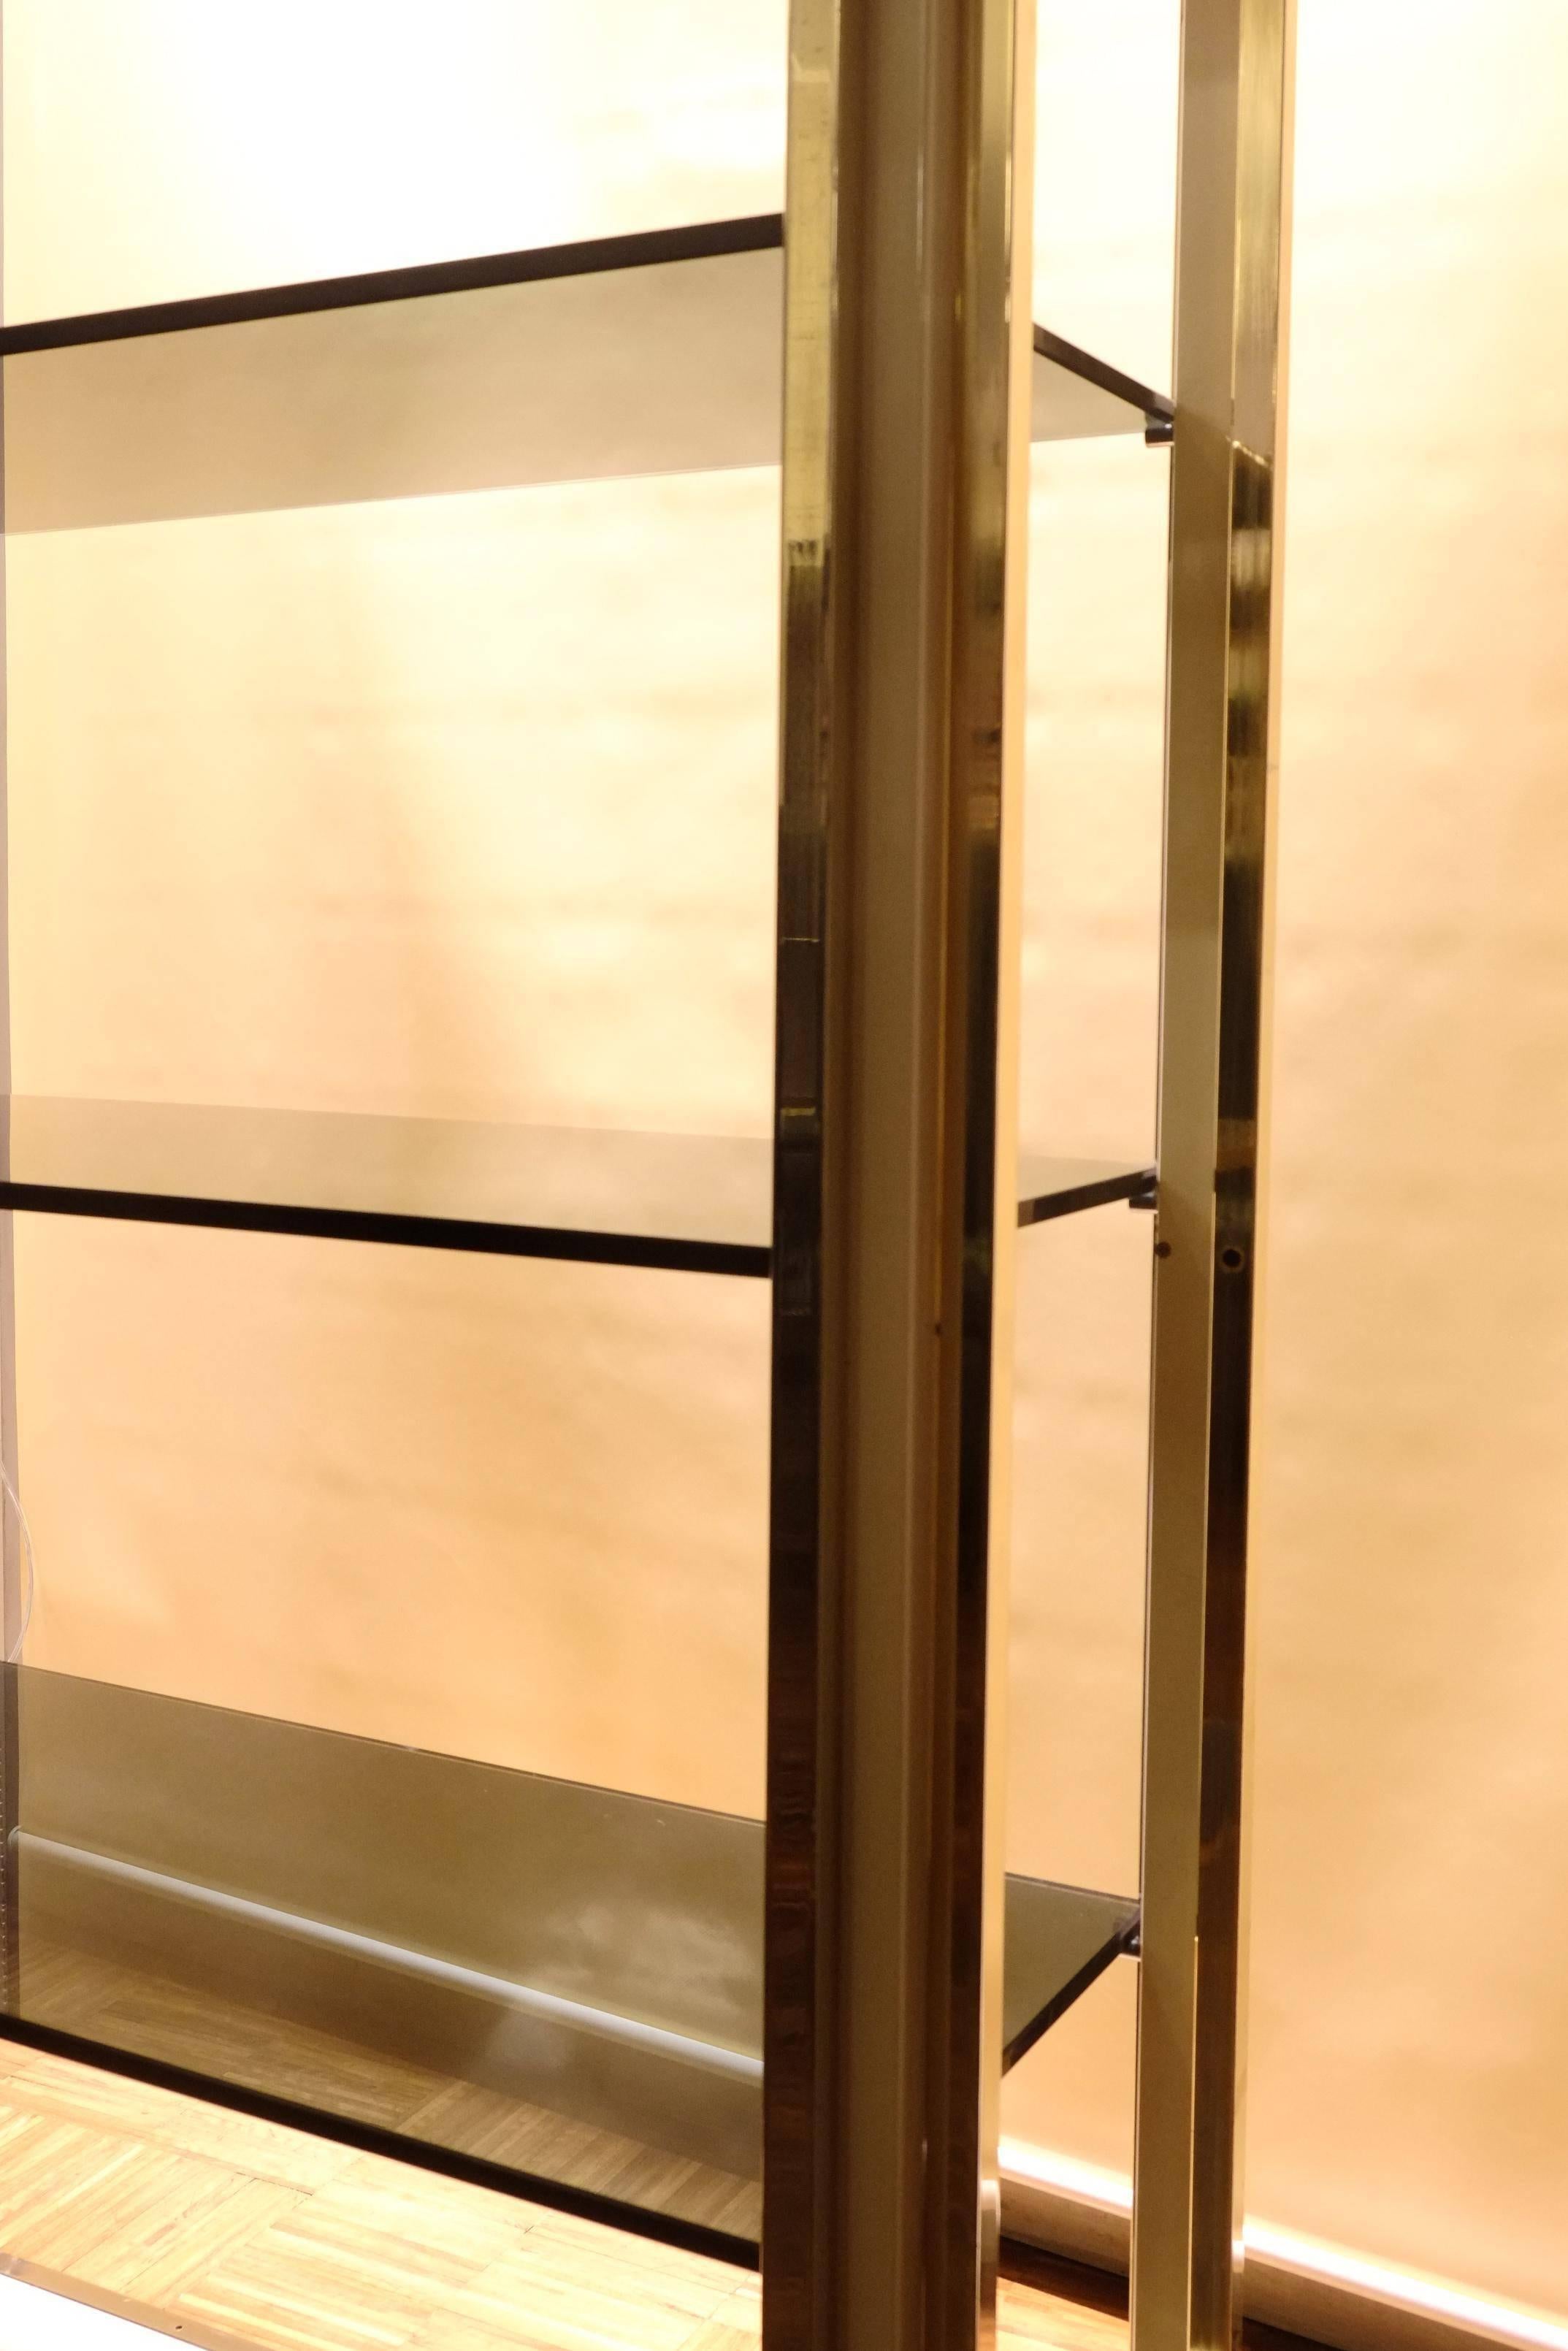 Pair of modern Italian brass and glass display cabinets or vitrines by Romeo Rega, from the 1960s. Painted metal bodies with brass trim and alternating brass and glass shelves.